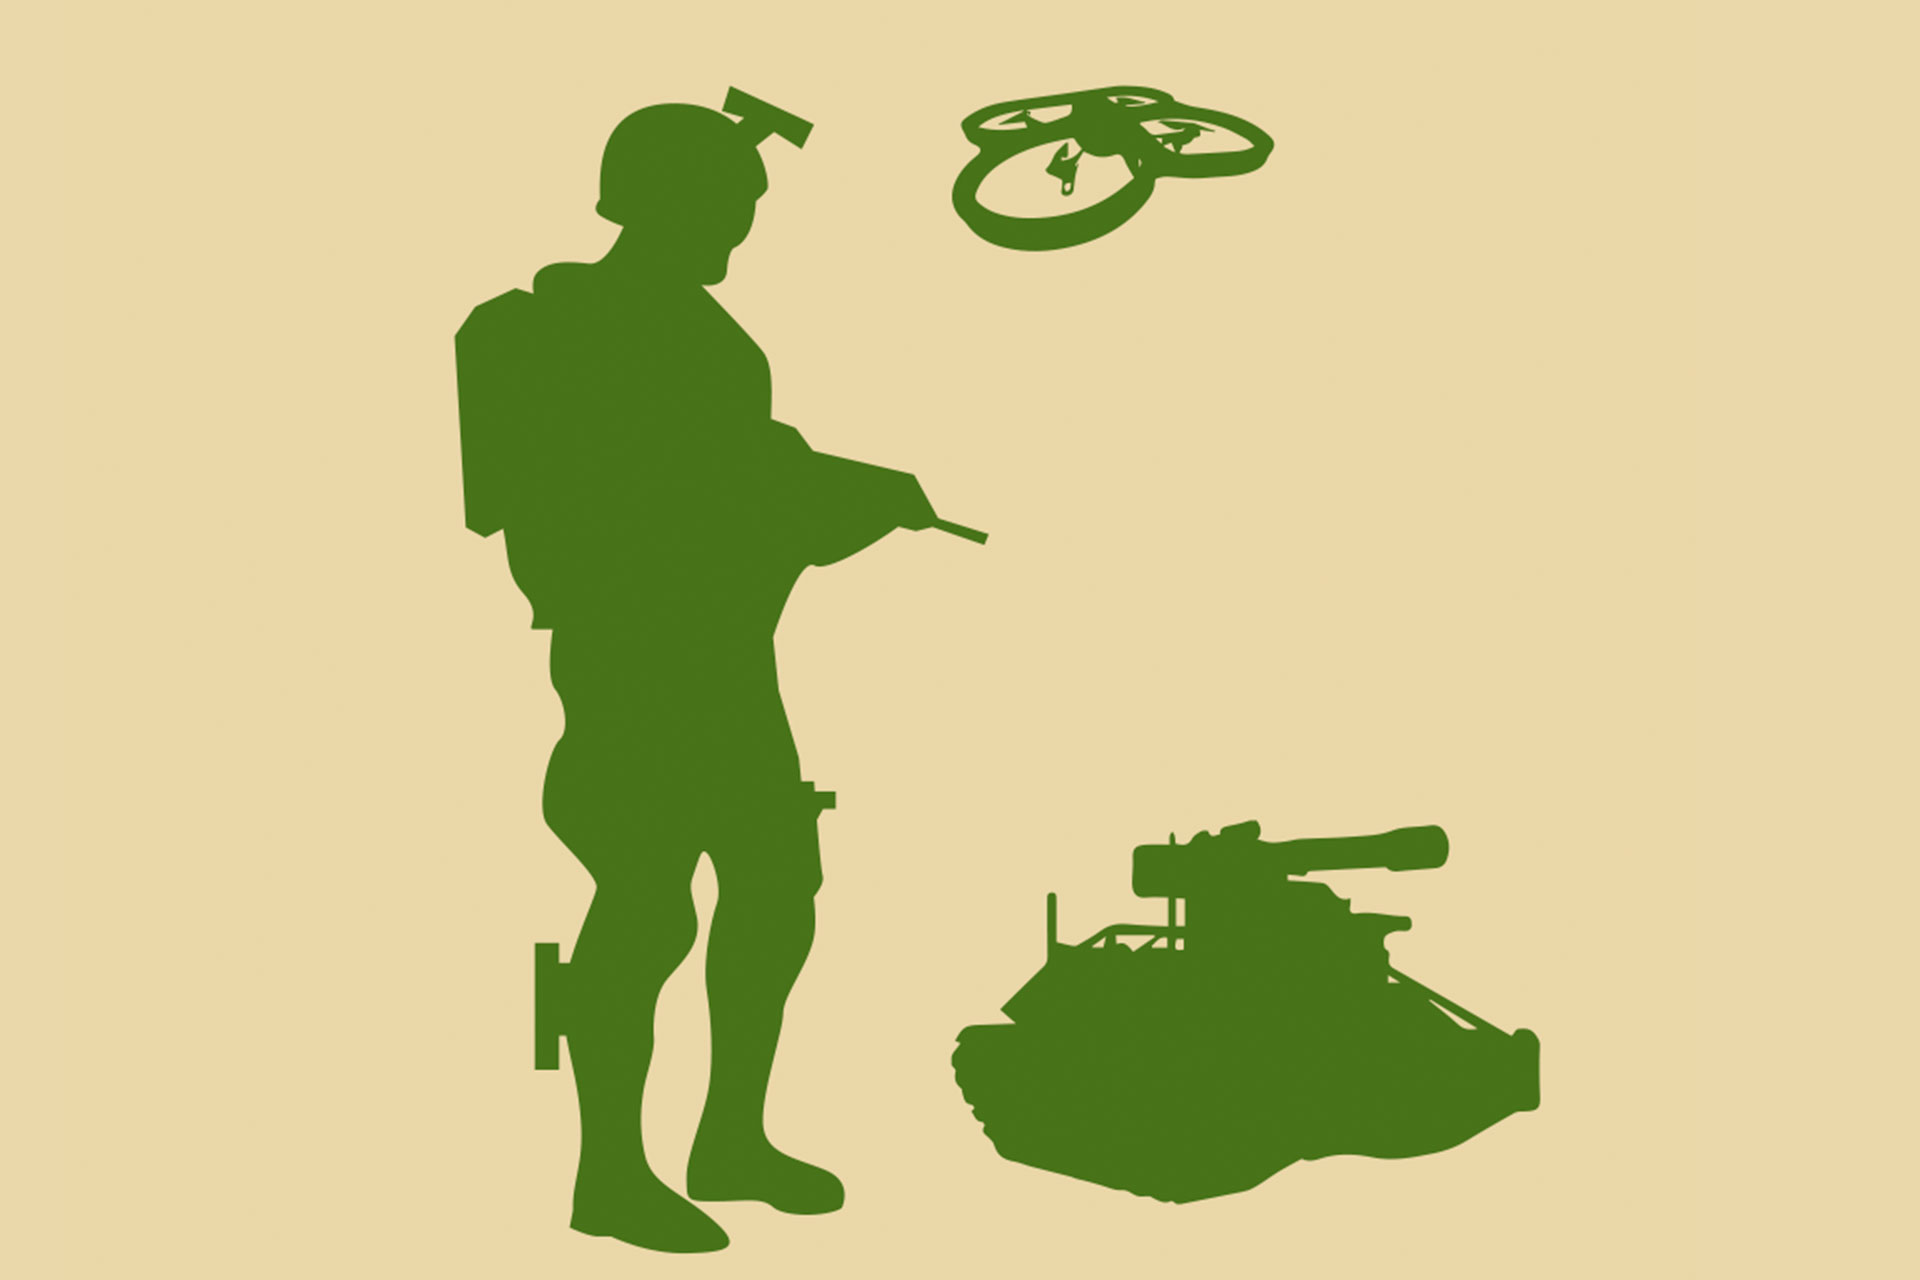 Next Generation Infantry Battalion to boast man-unmanned teaming capabilities